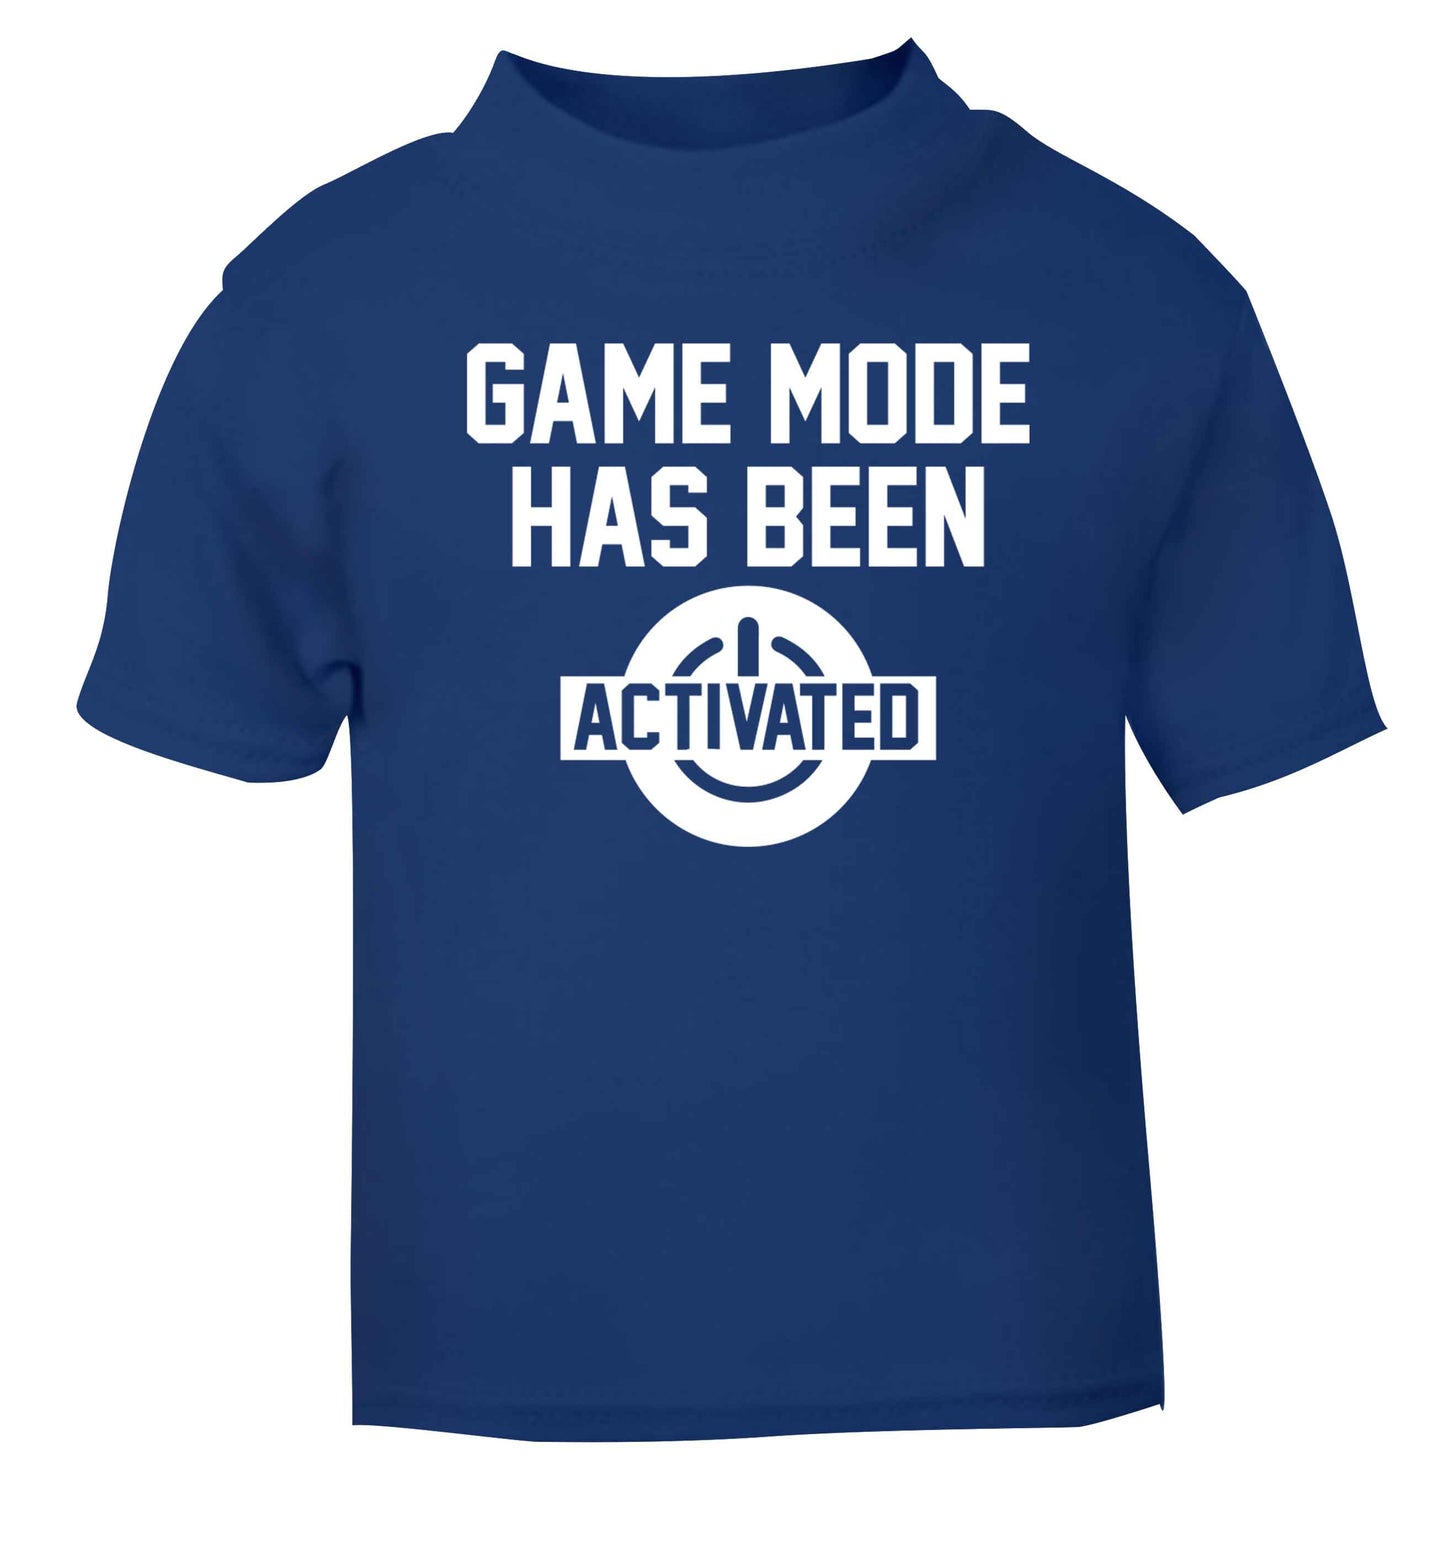 Game mode has been activated blue baby toddler Tshirt 2 Years